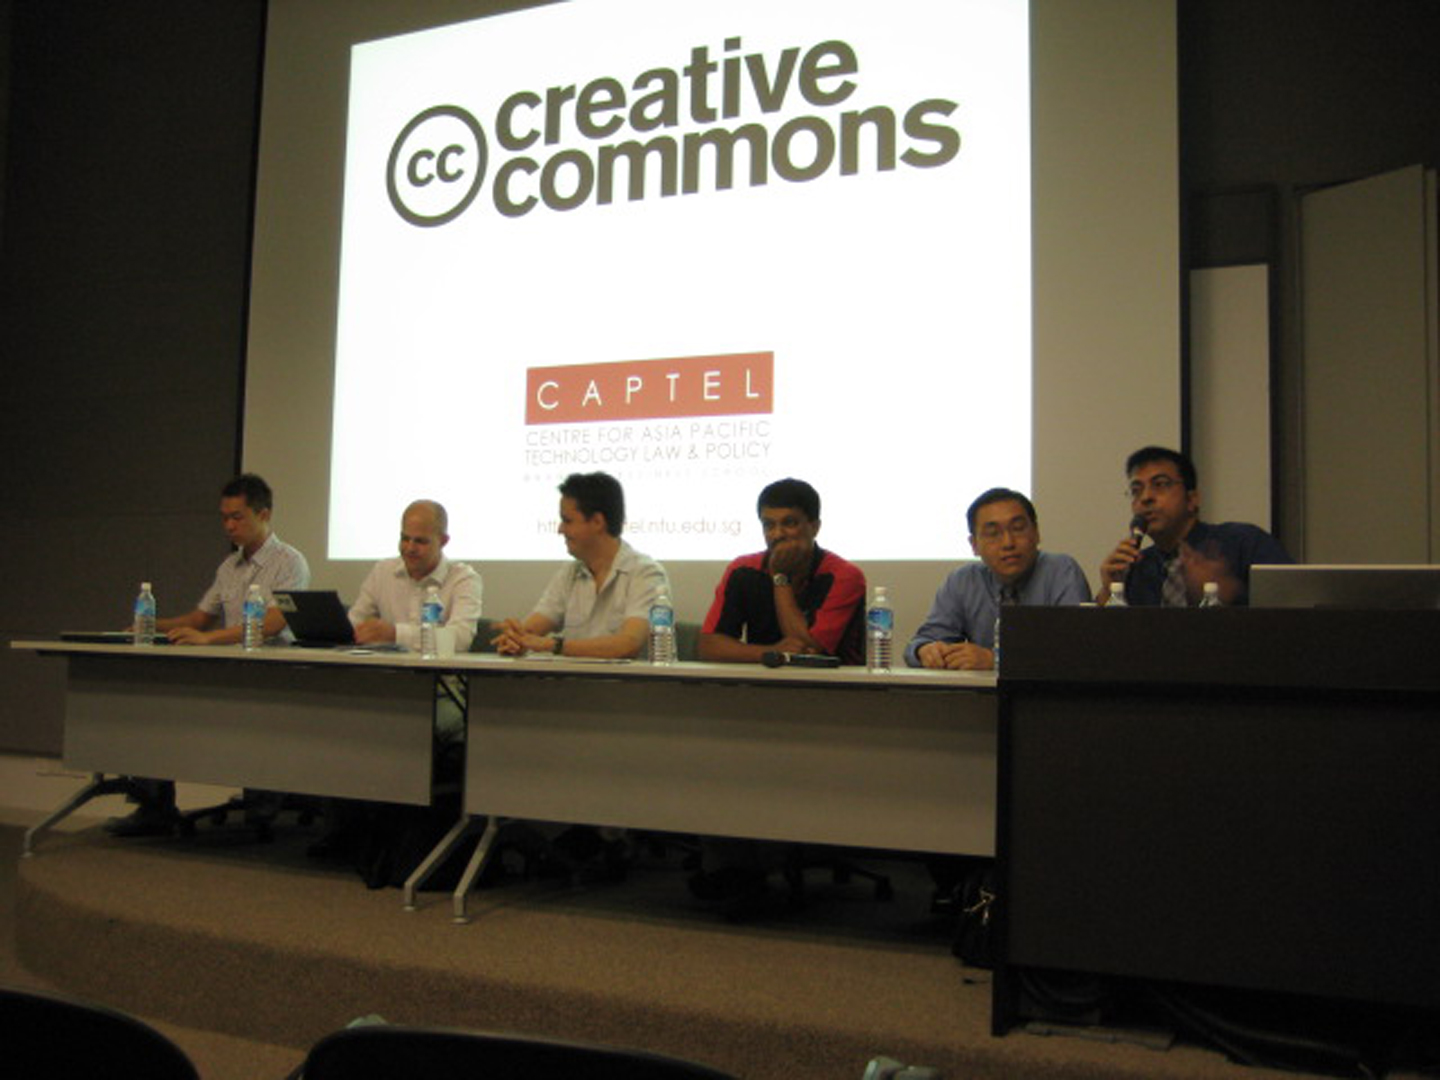 ©ISEA2008: 14th International Symposium on Electronic Art, Samtani Anil and Harry Tan, Copyright And The Creative Commons